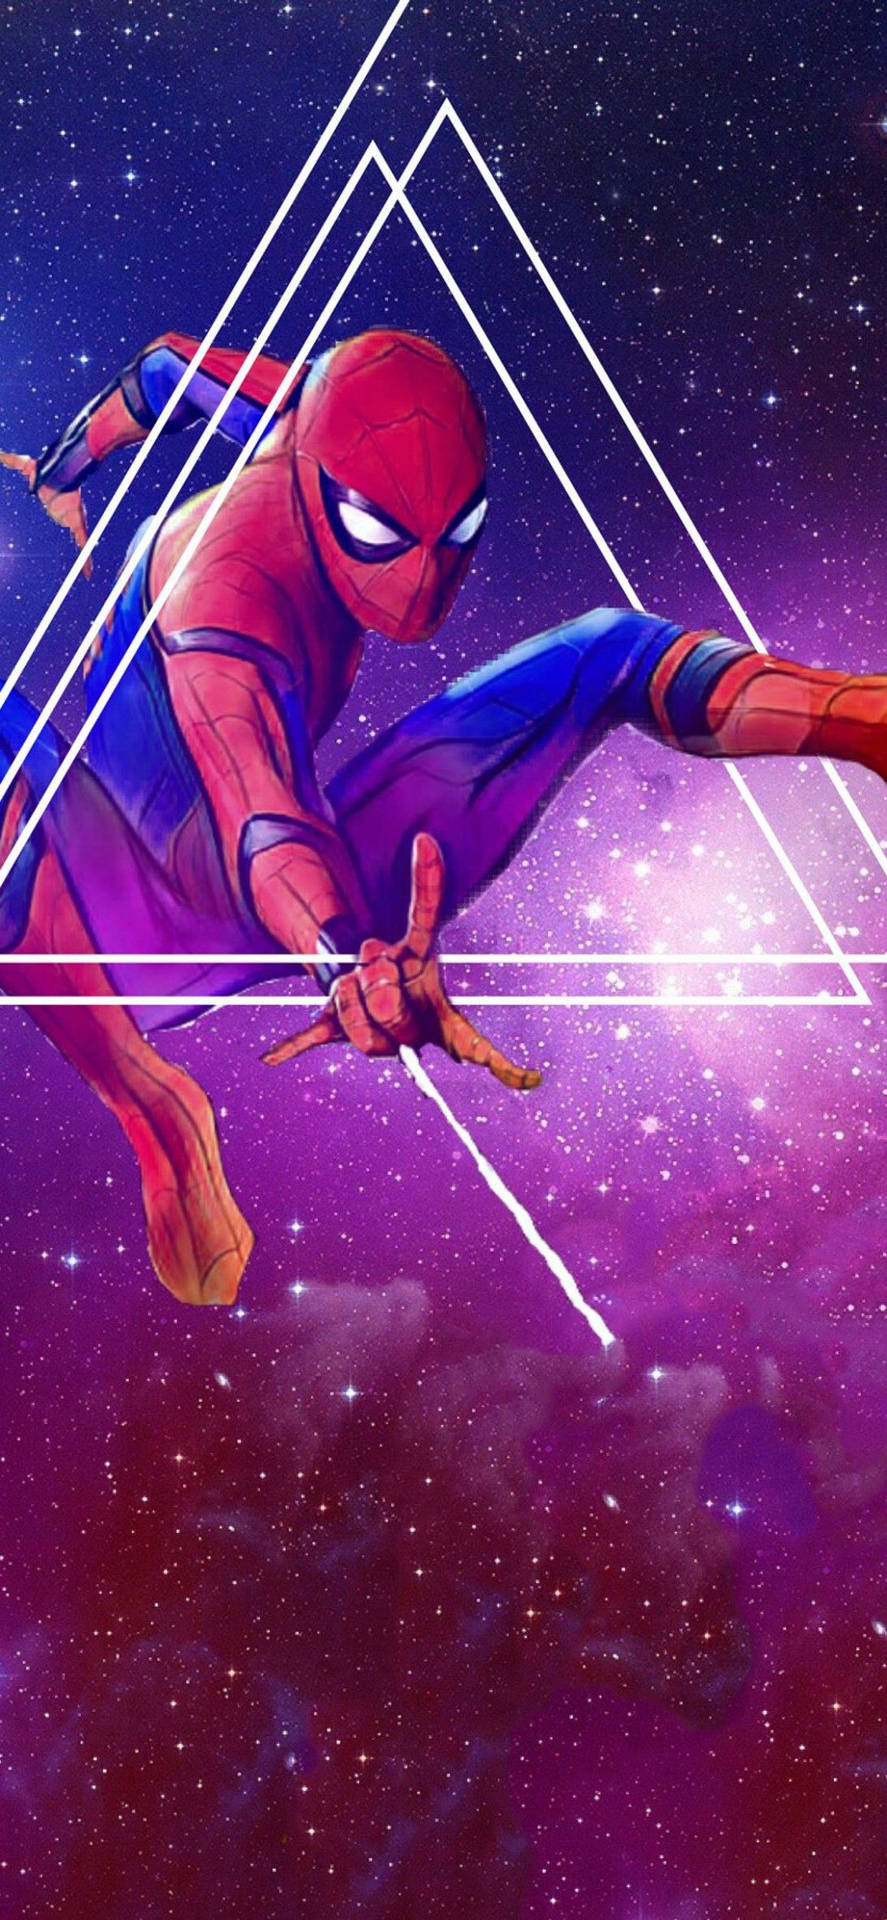 Spiderman marvel hero using his power, releasing spider web in a purple galaxy background.